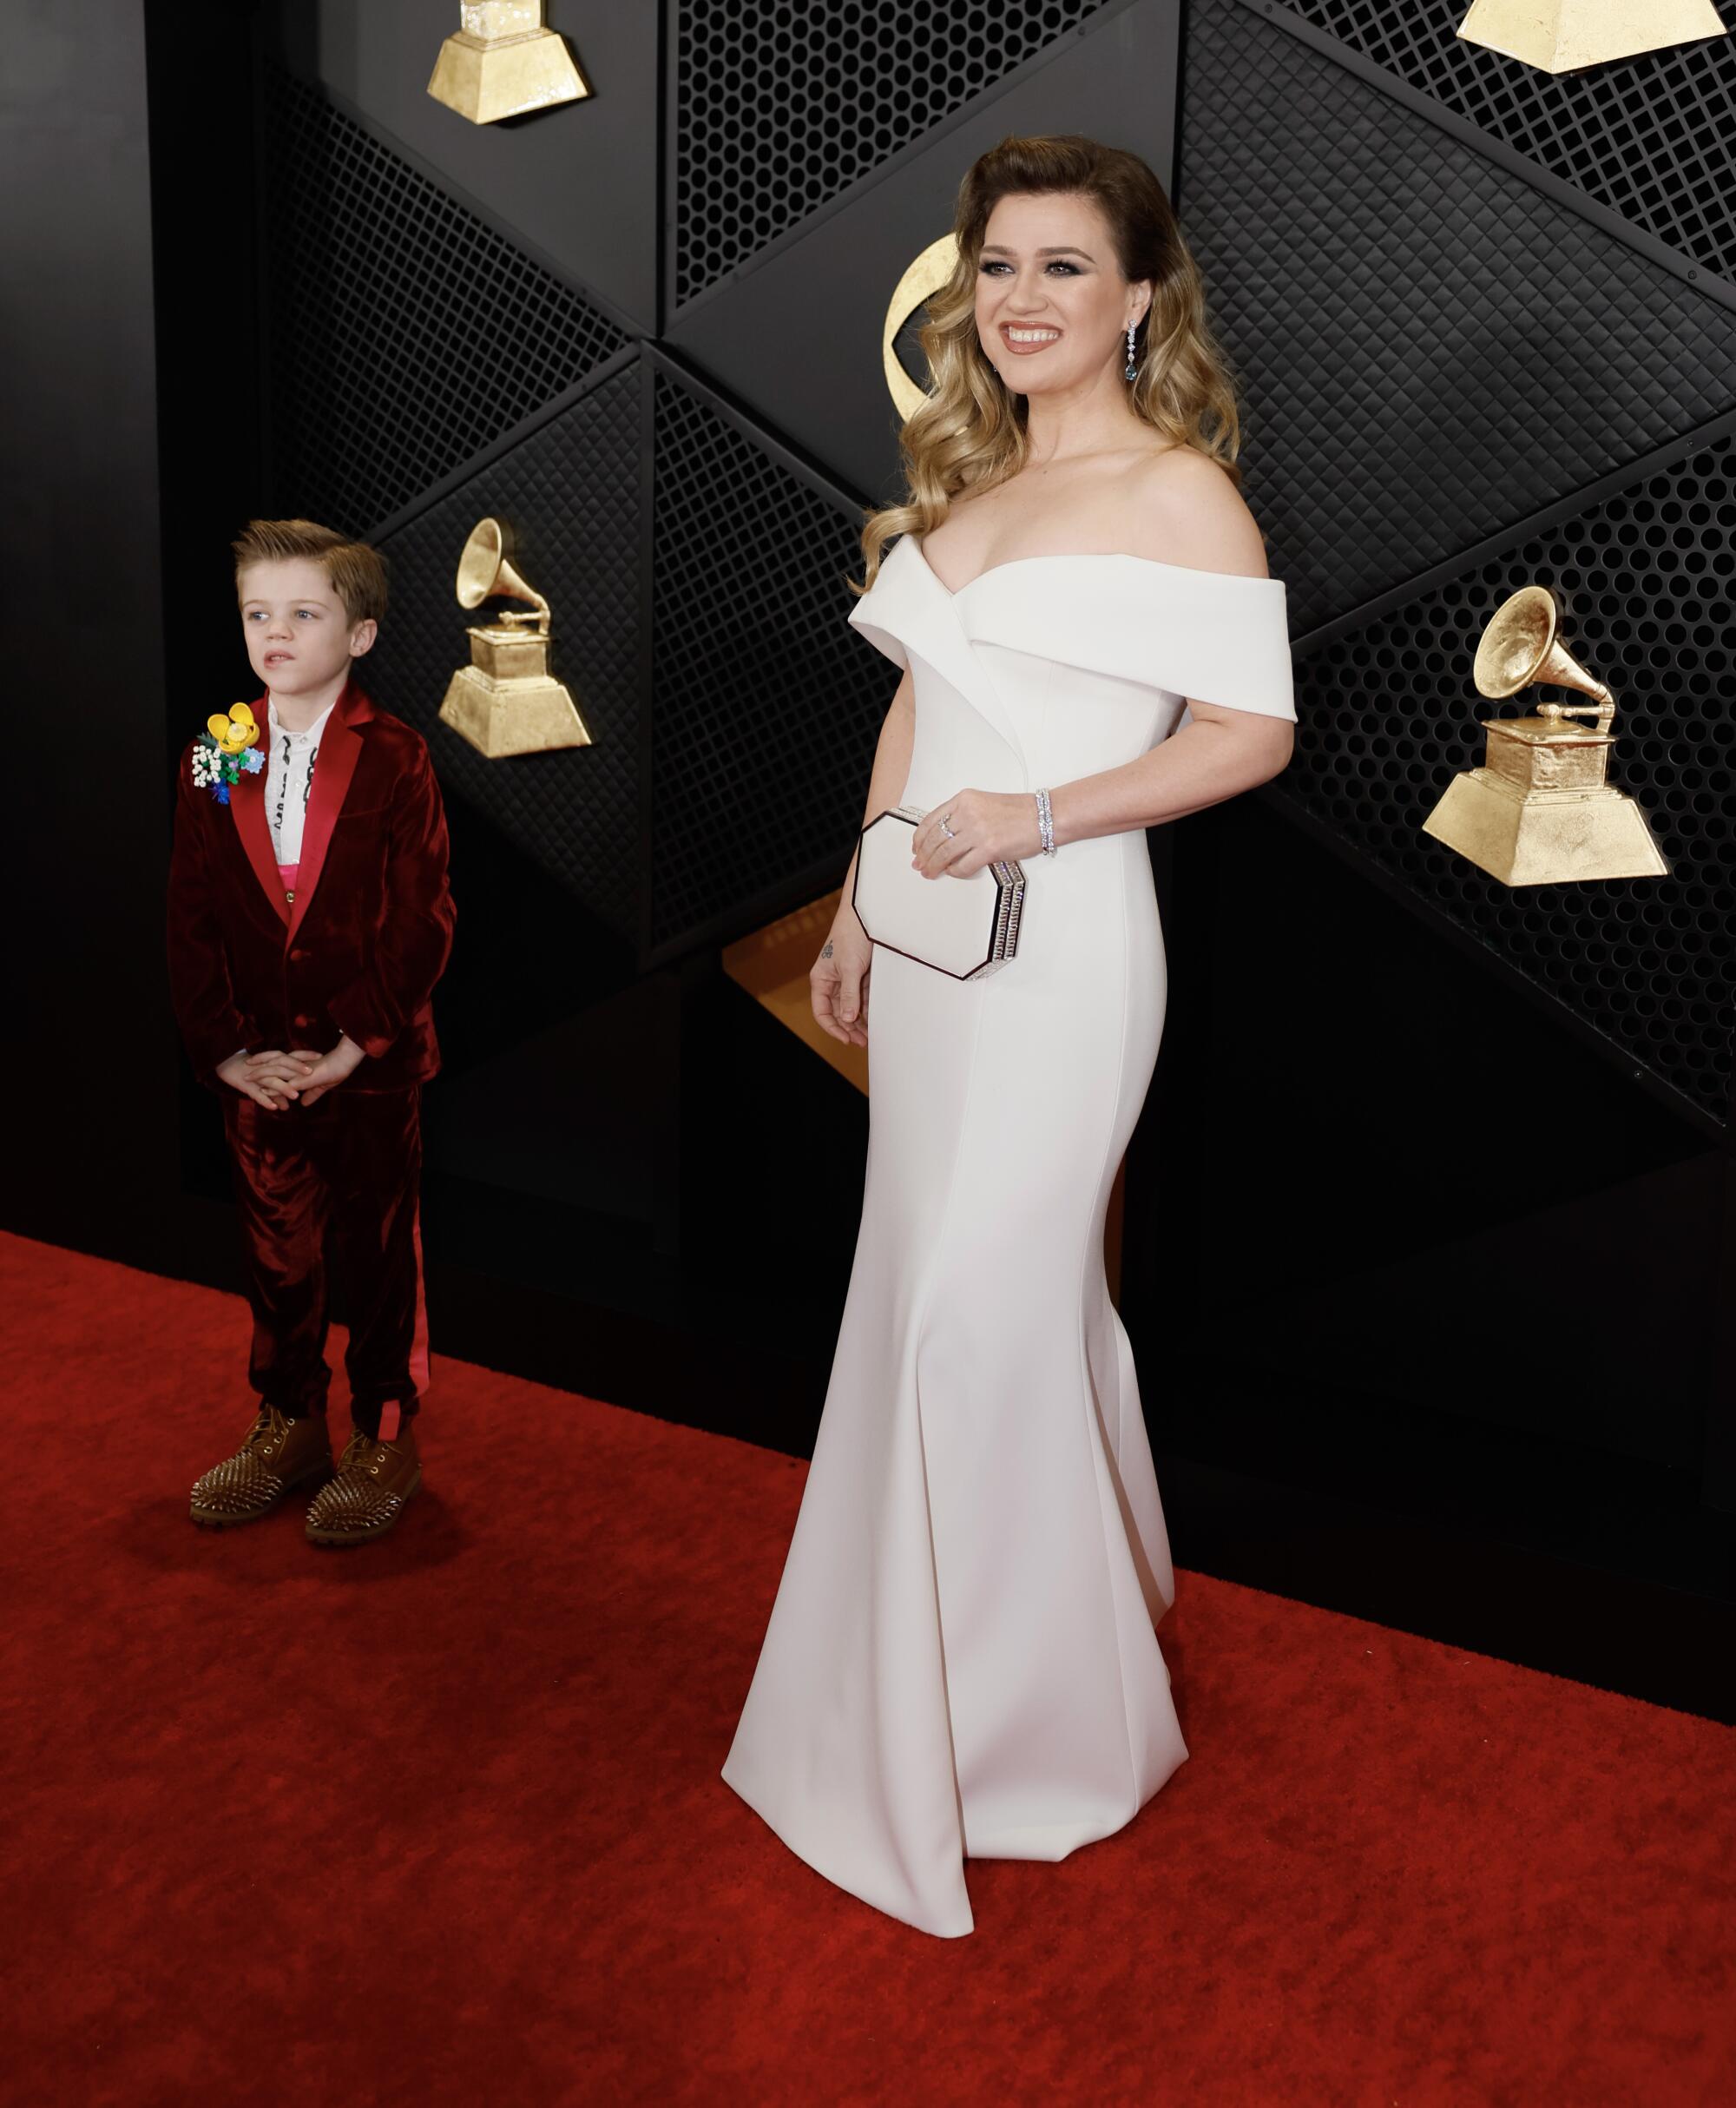 Kelly Clarkson wears a white dress as she poses with her young son, who wears a dark red velvet suit 